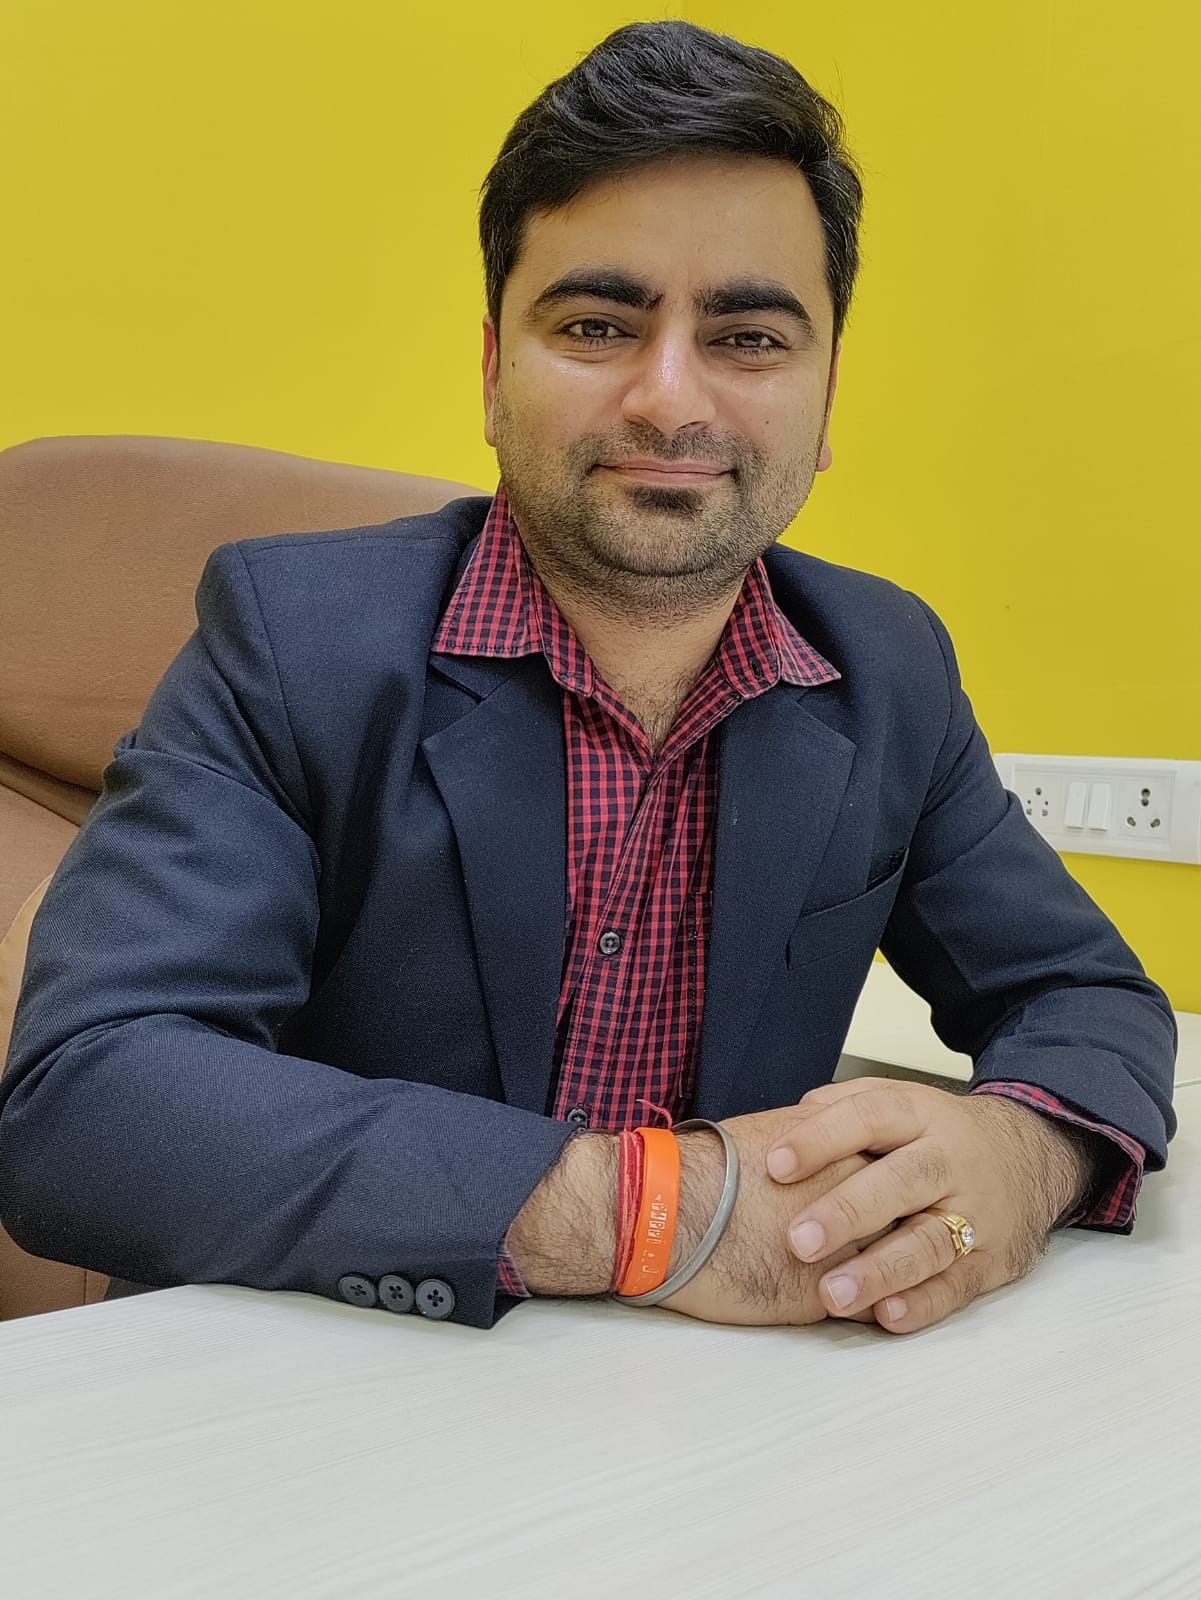 An Insightful conversation between Omkar Darekar, Sr. Manager, Porter and Jayant Basantani, Head of Sales at Mobavenue on How to handle a different kind of data